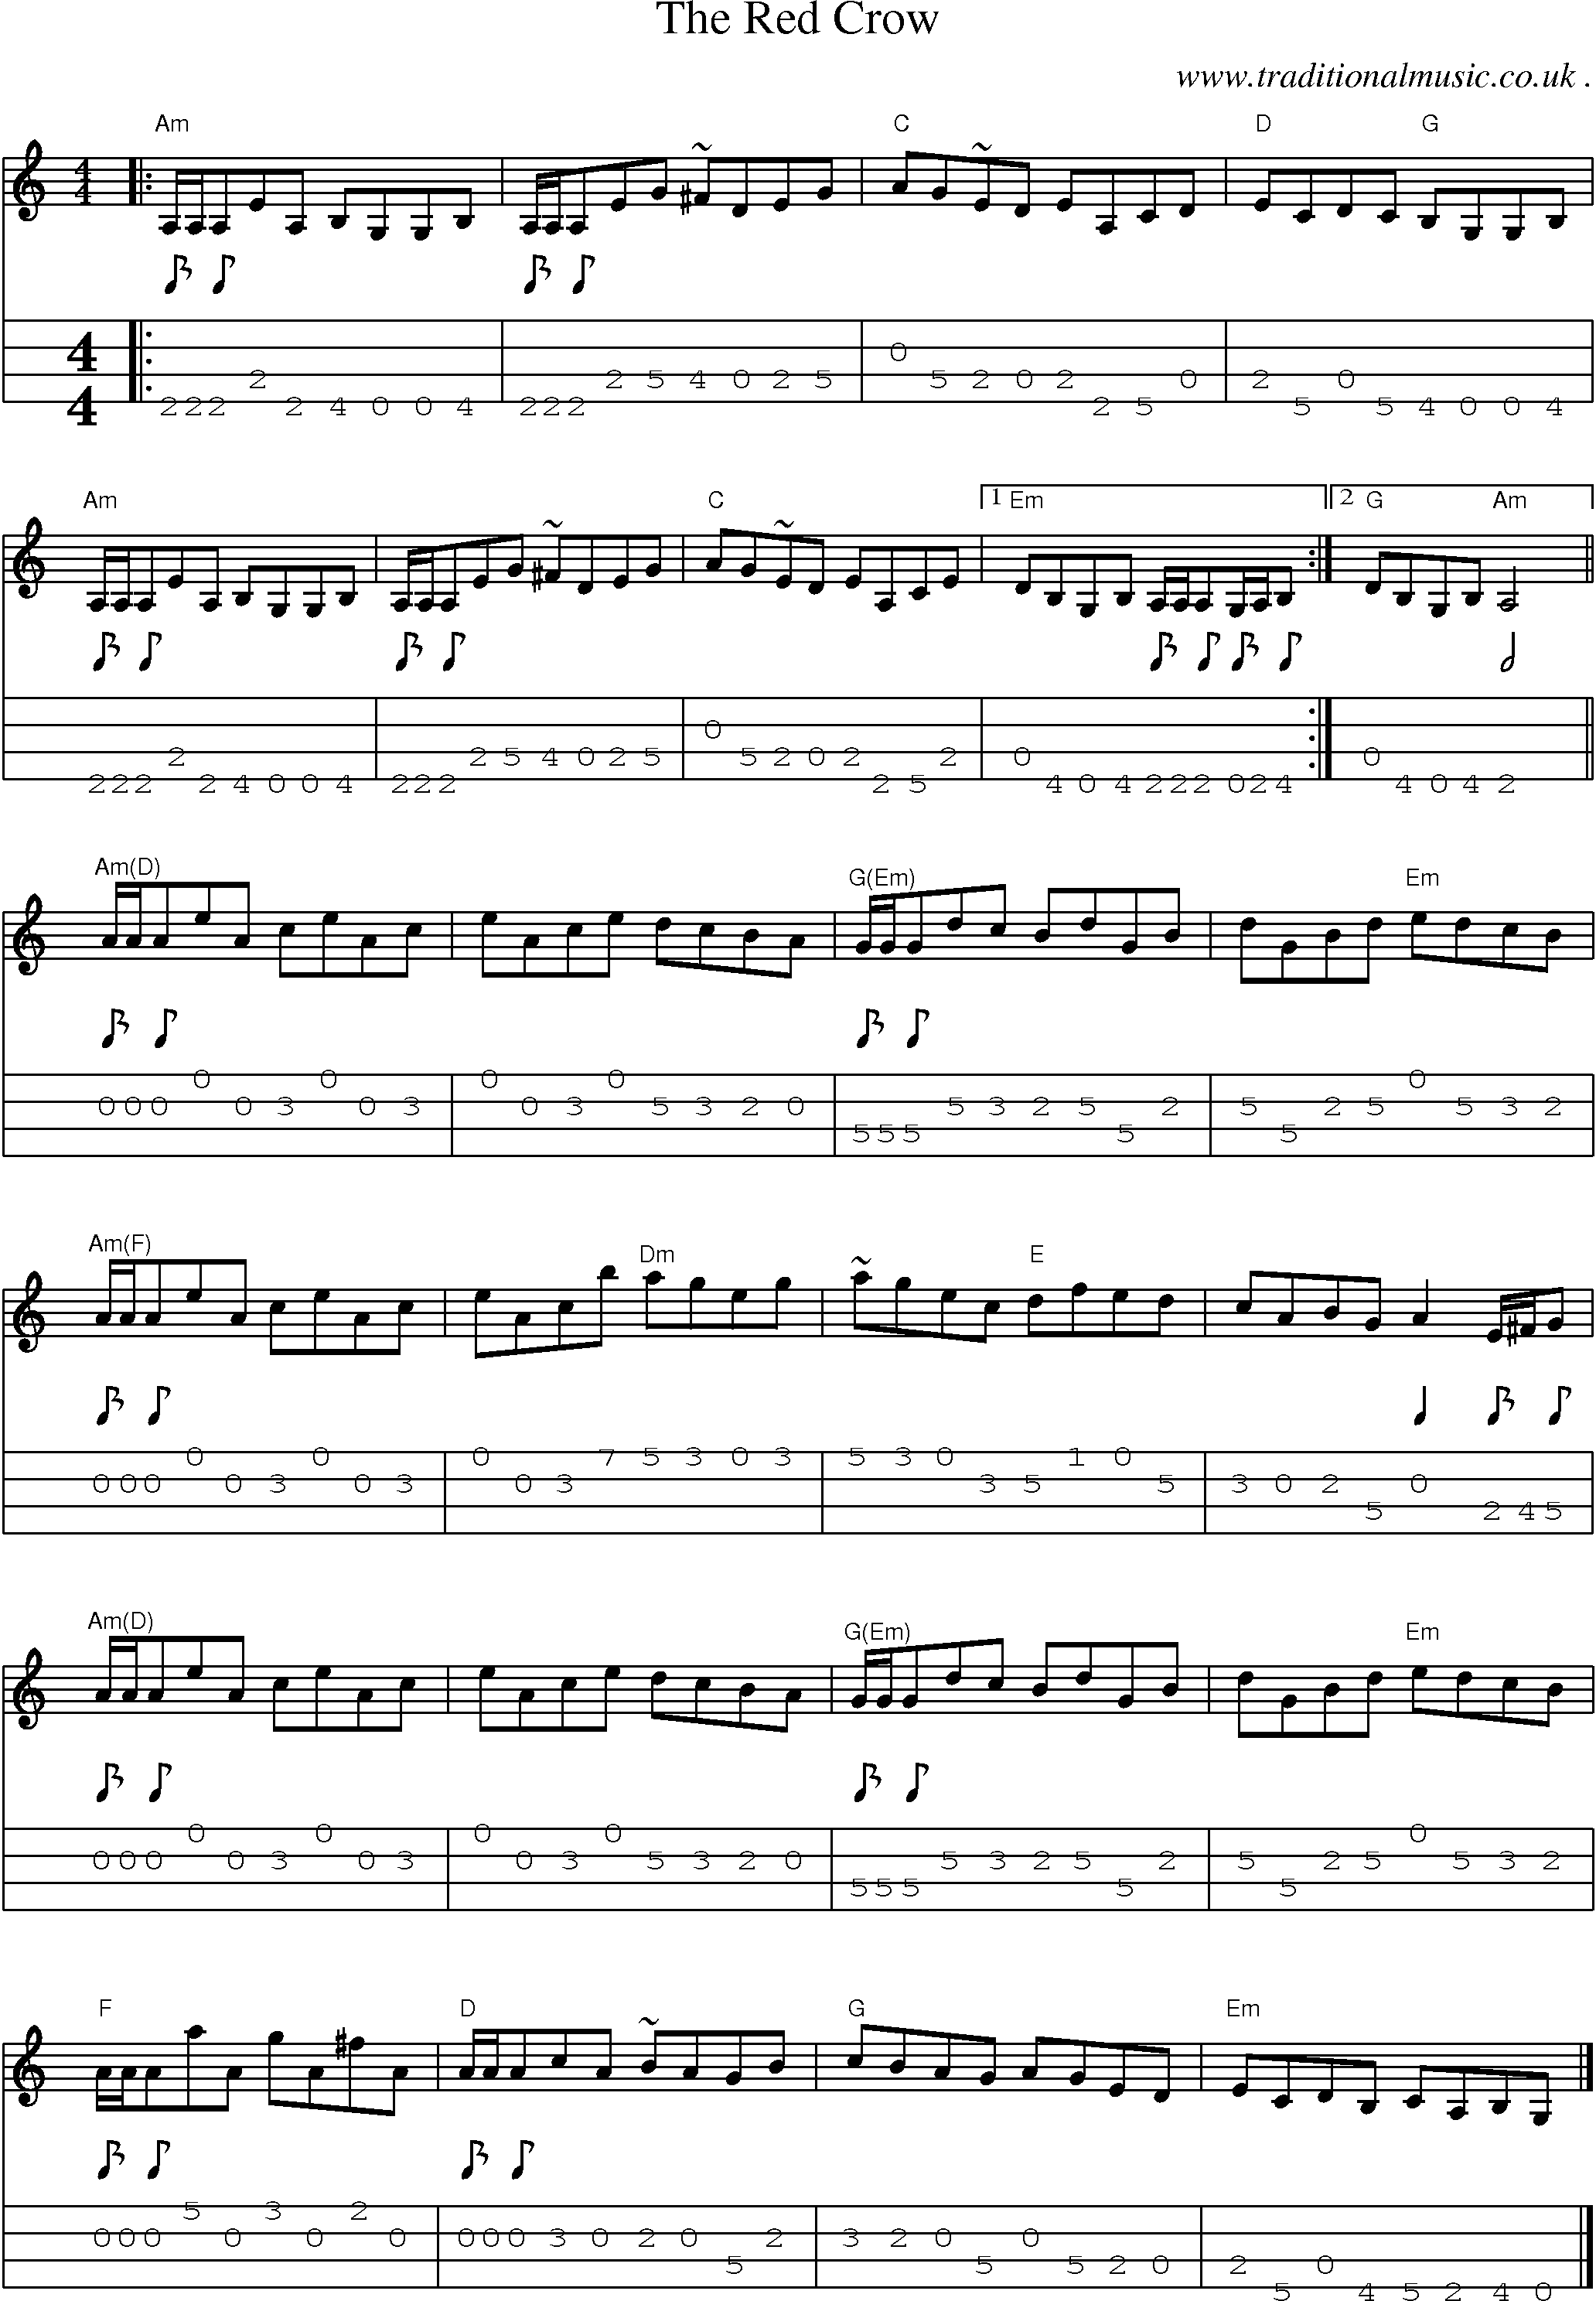 Music Score and Guitar Tabs for The Red Crow